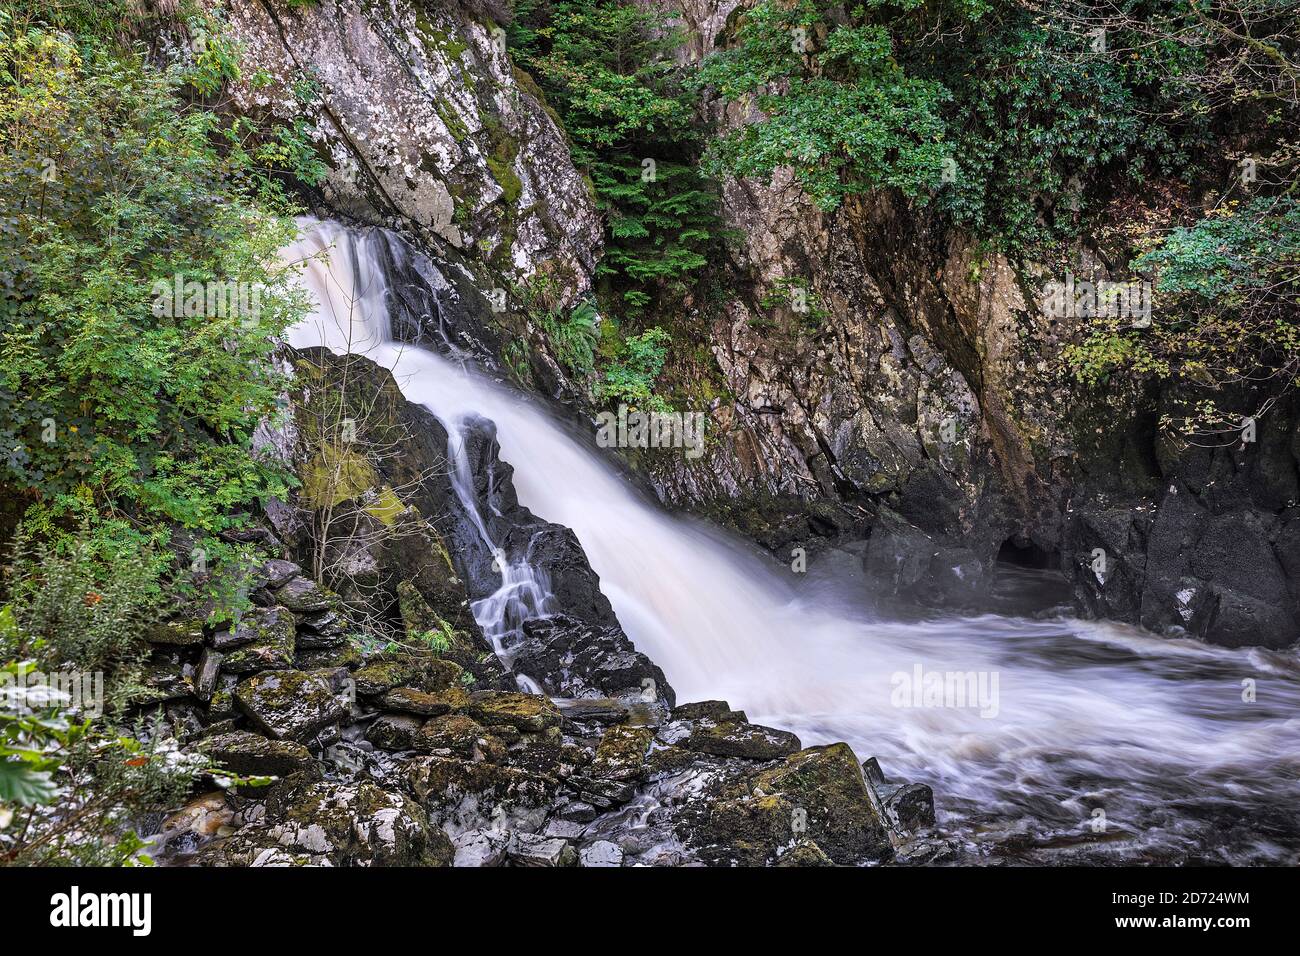 Conwy Falls on the River (Afon) Conwy near Betws-y-Coed North Wales UK October 2019 1686 Stock Photo